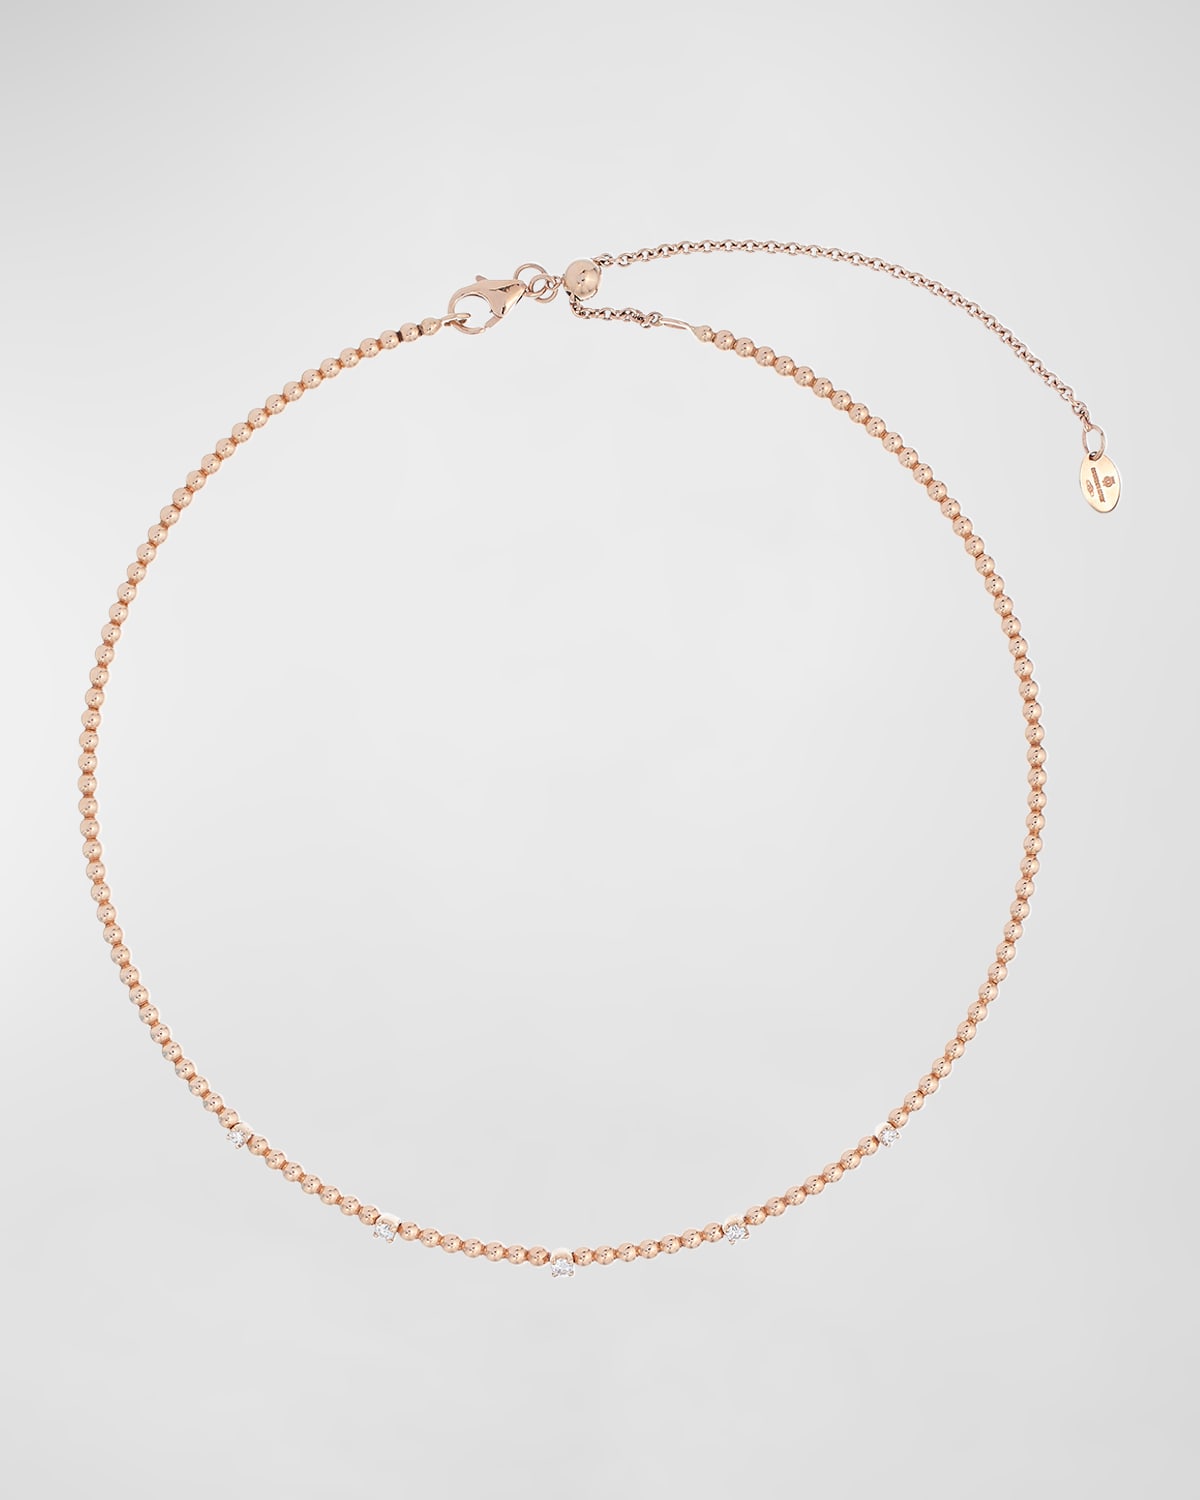 Krisonia 18k Rose Gold Necklace With Diamonds